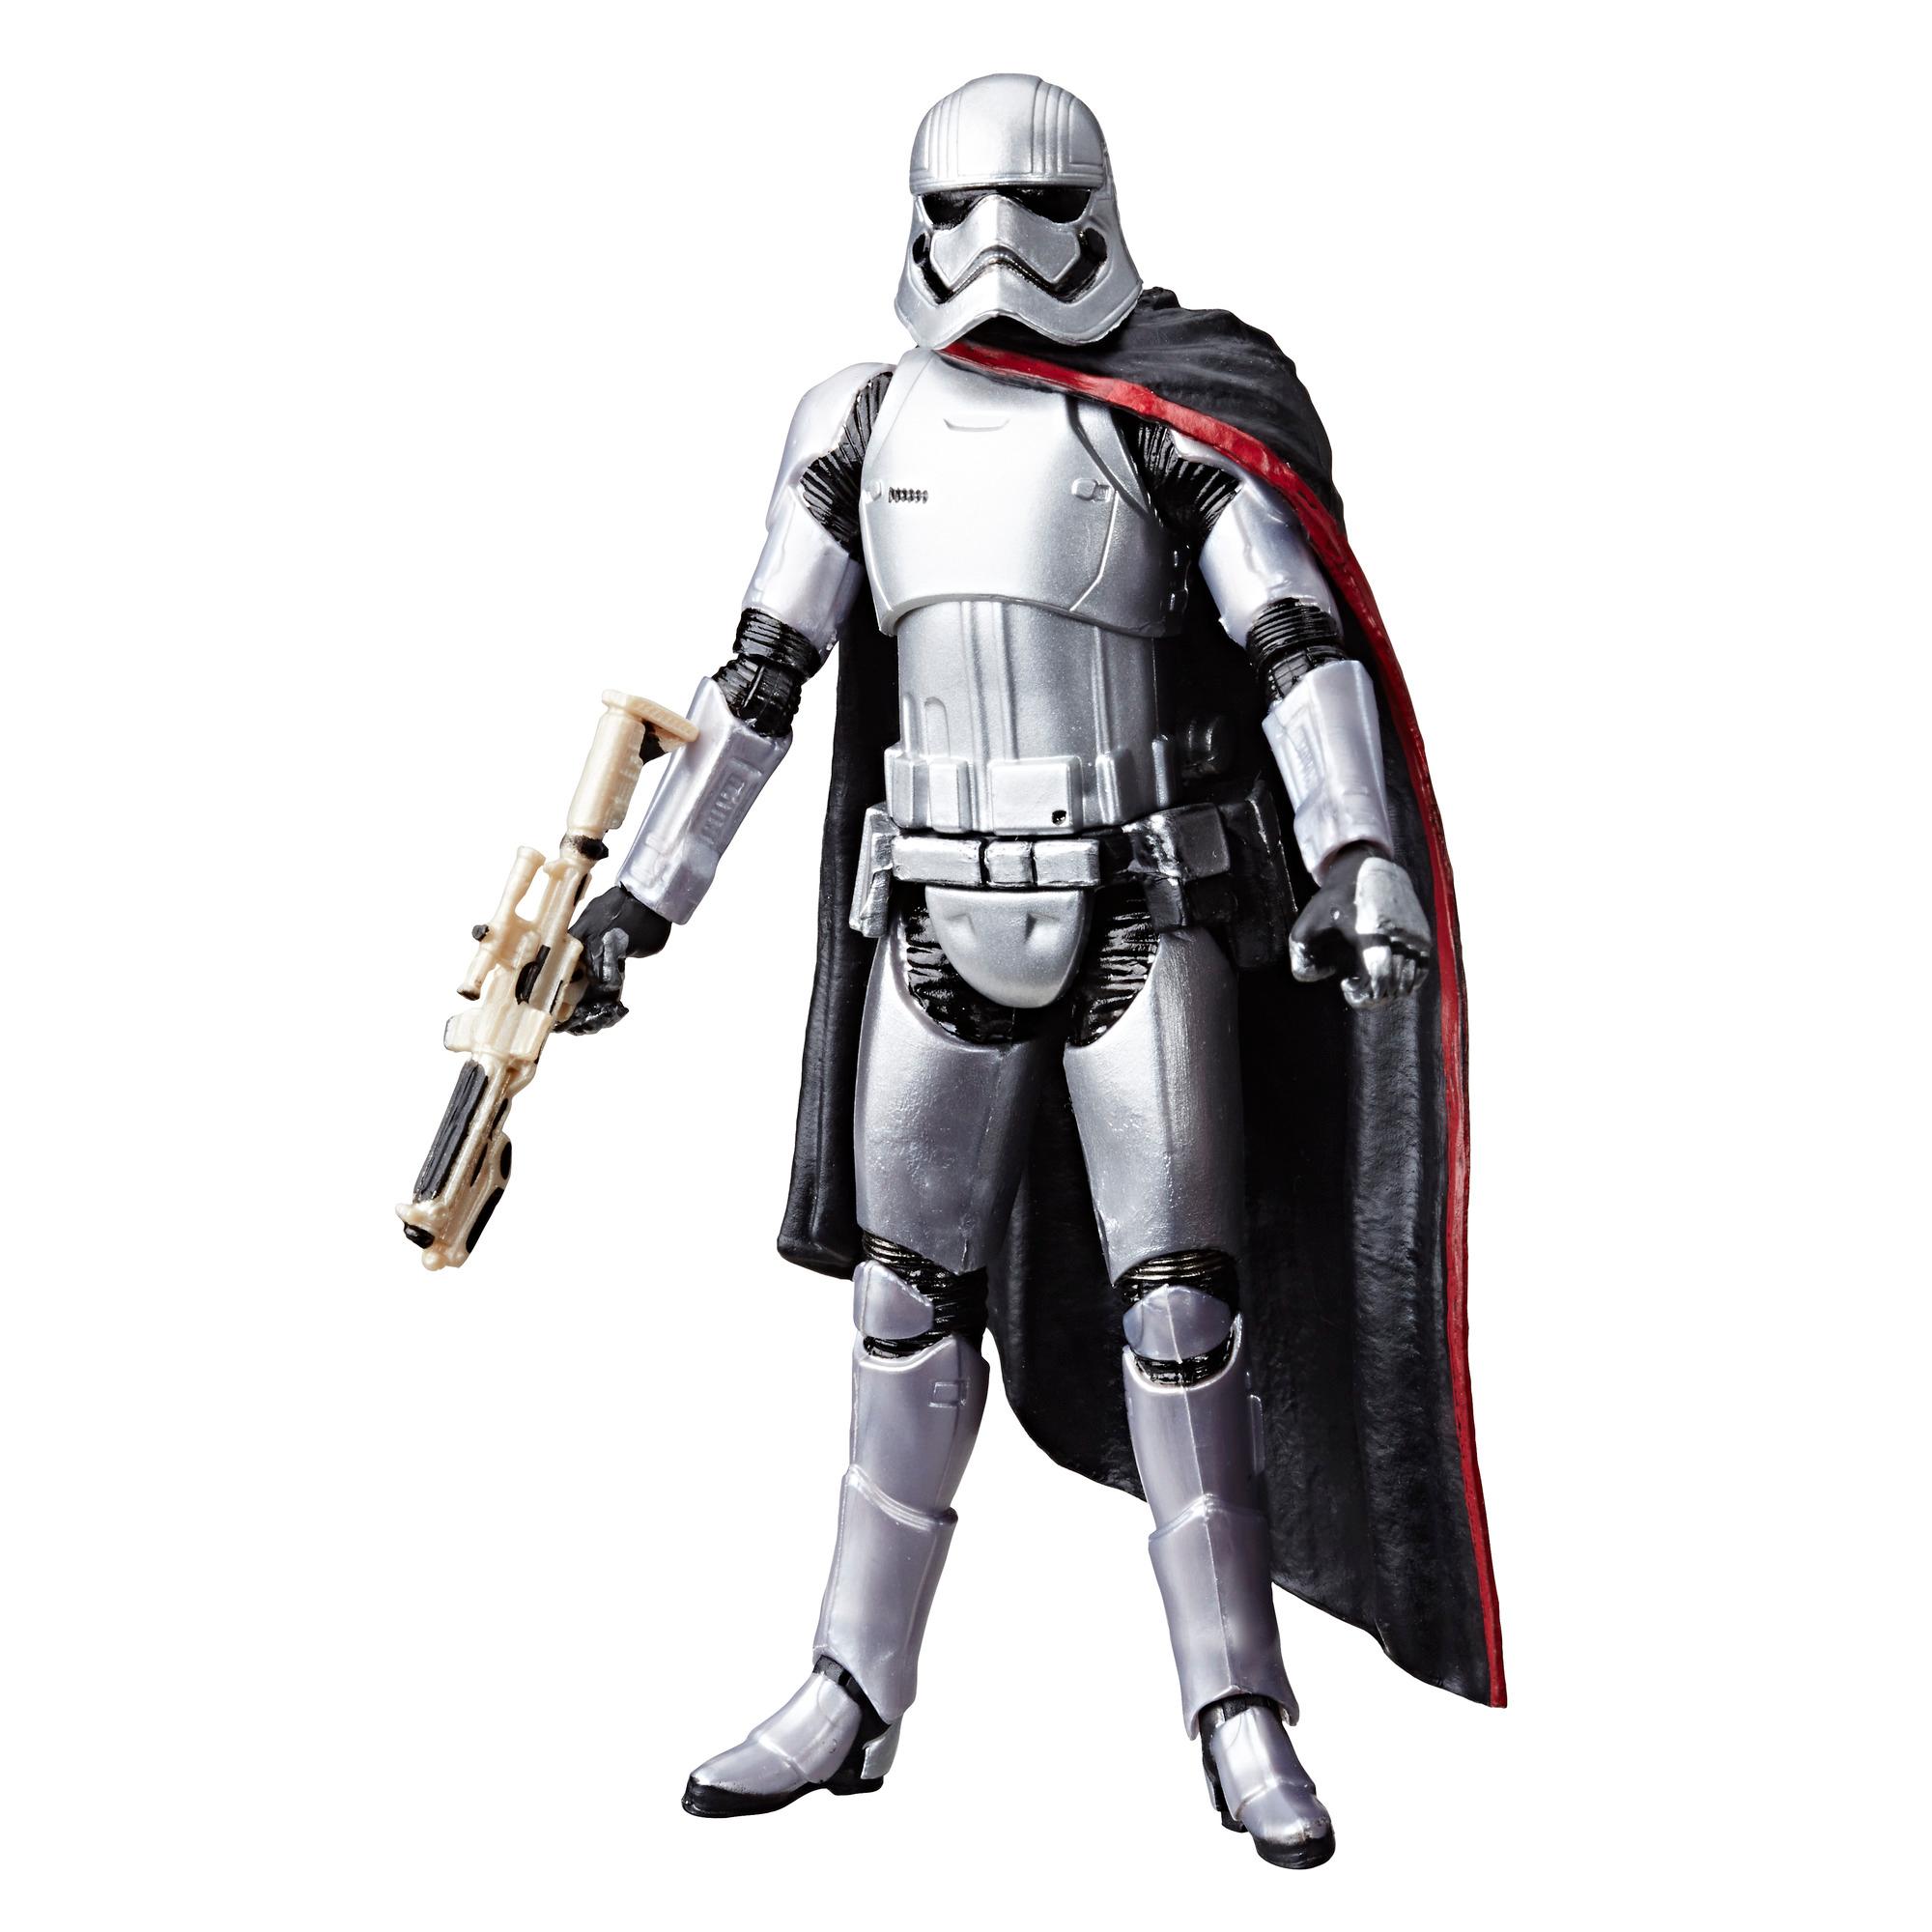 Star Wars Captain Phasma 12in Action Figure Toy Disney Hasbro The Last Jedi for sale online 